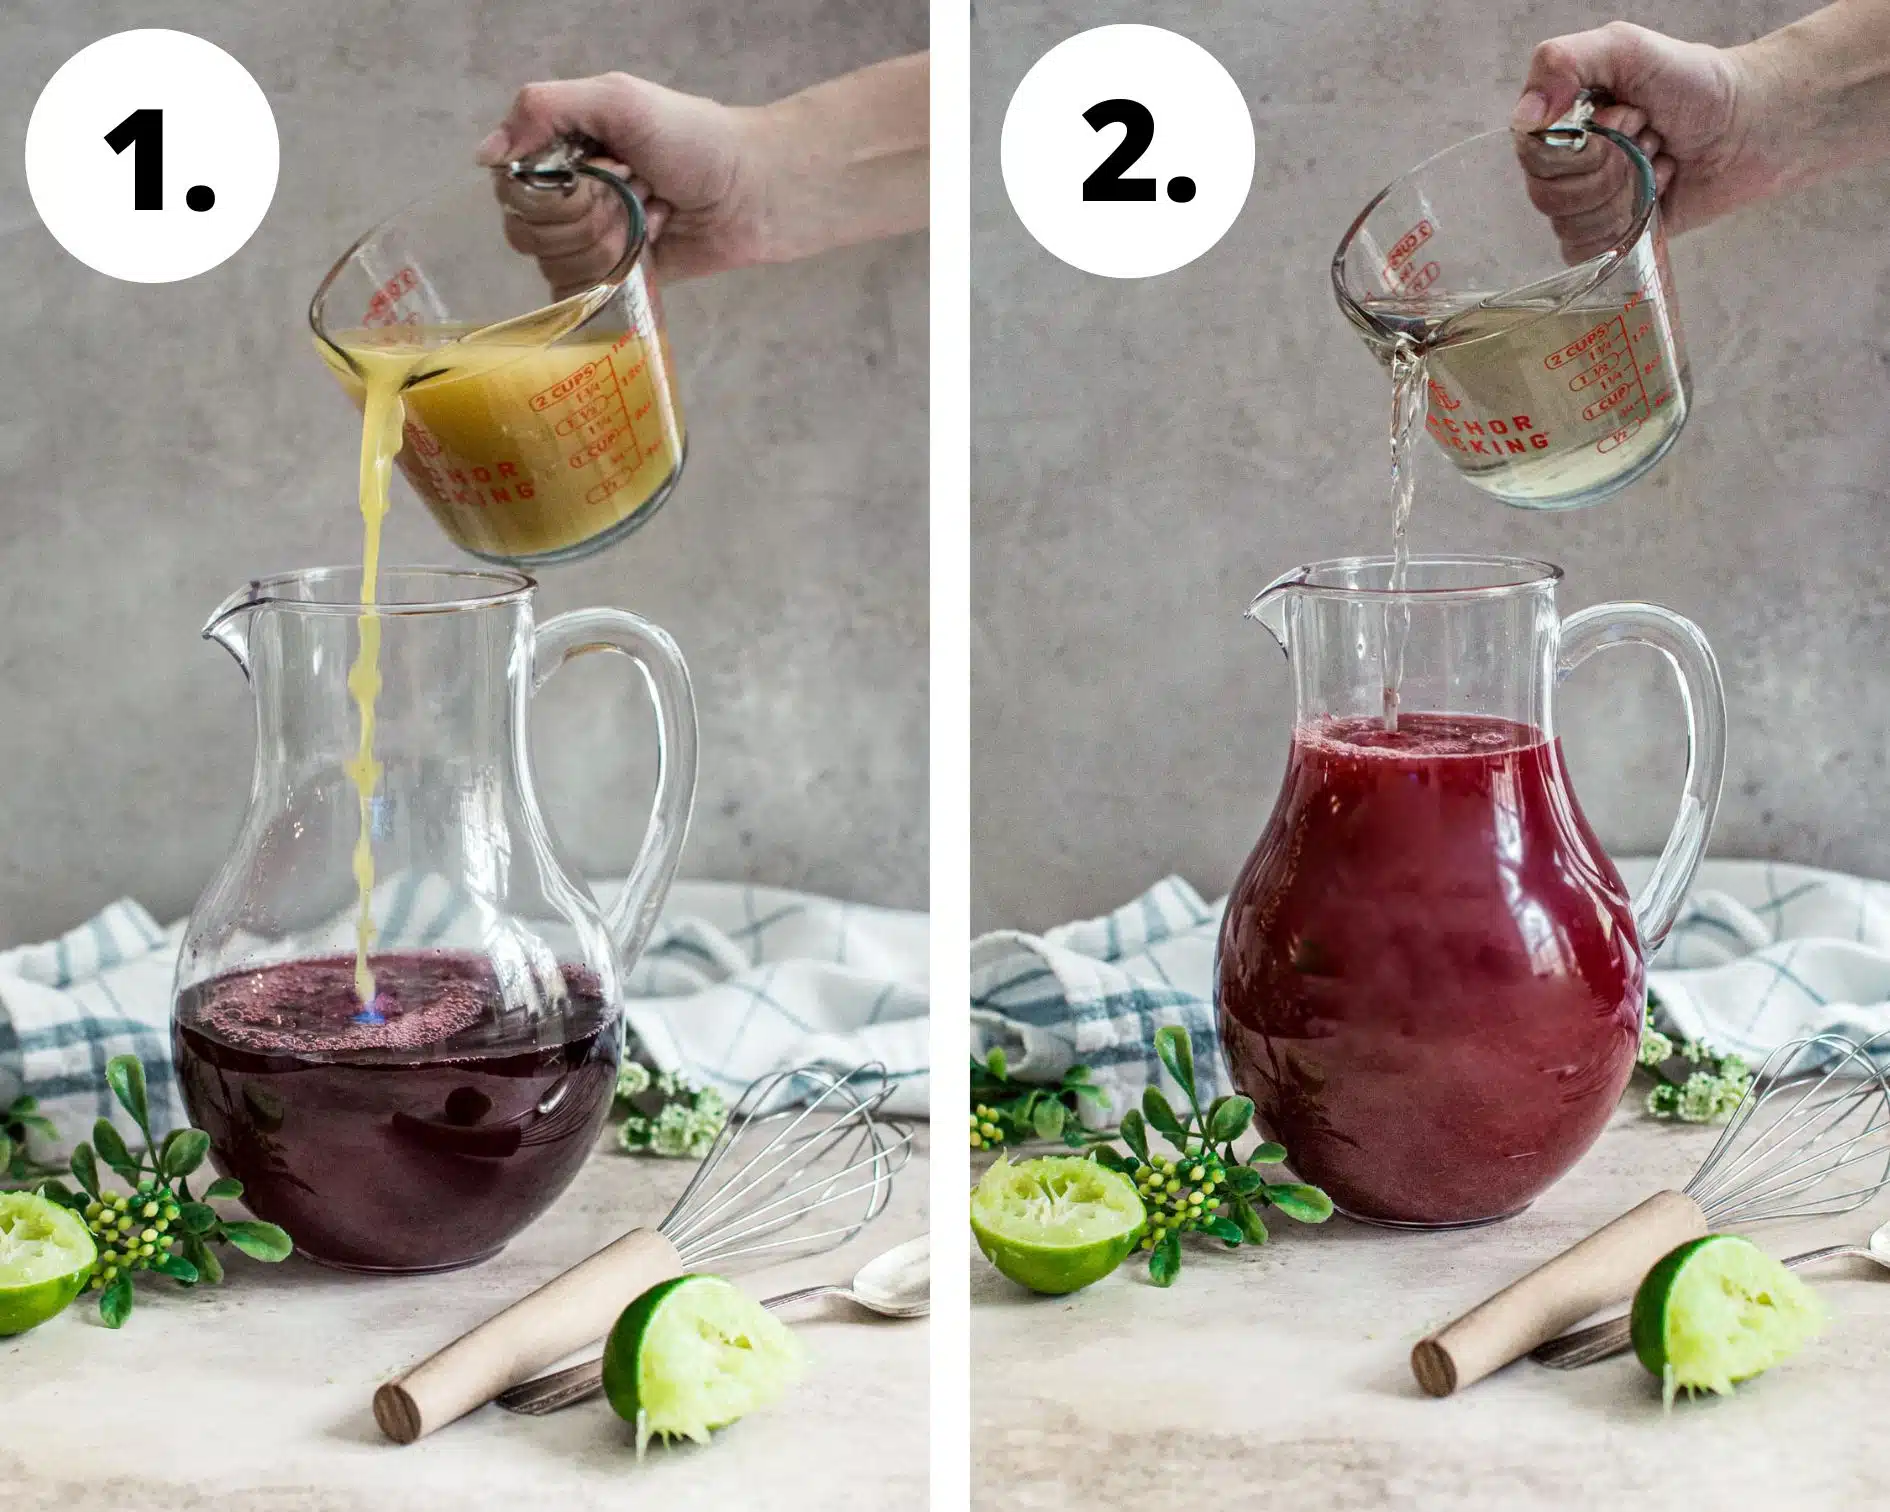 Fruit punch process steps 1 and 2.